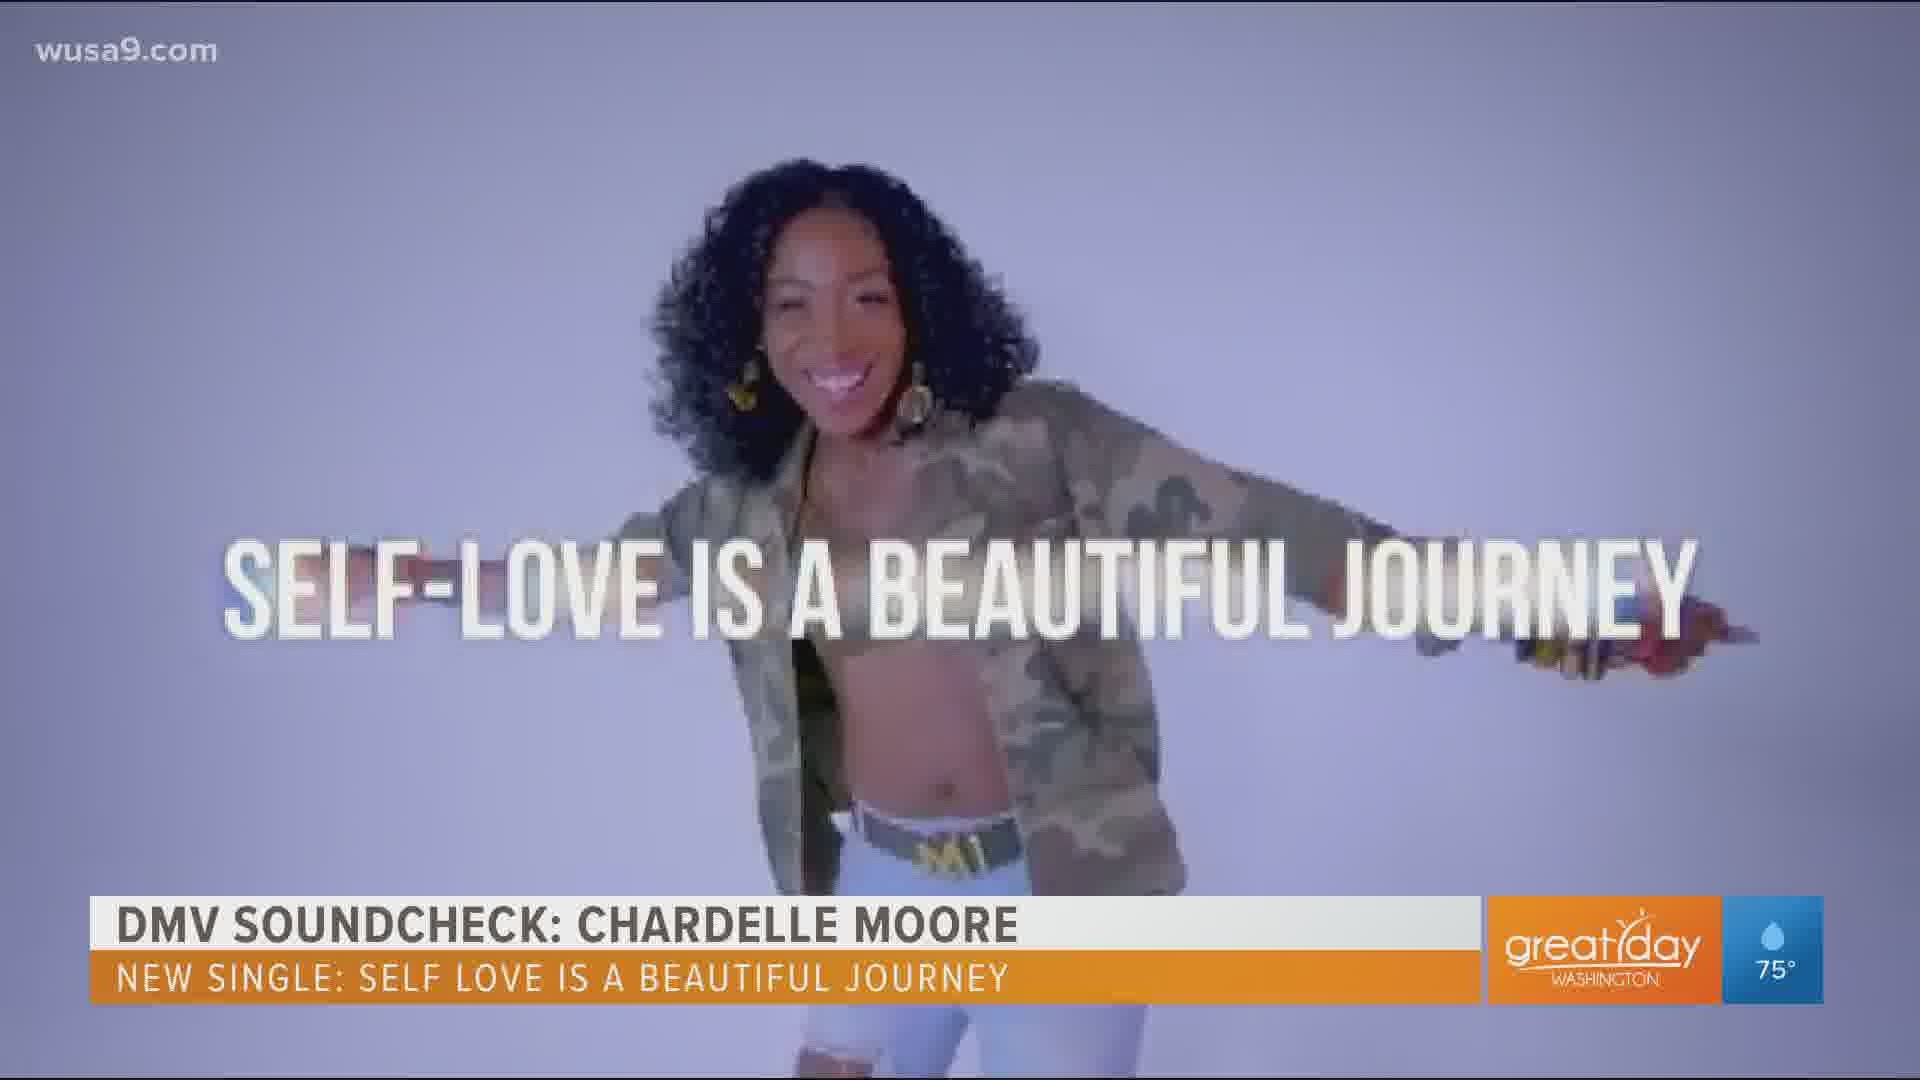 Check out Chardelle's new single, "Self Love is a Beautiful Journey." For more information send an email to DMVSoundcheck@wusa9.com.